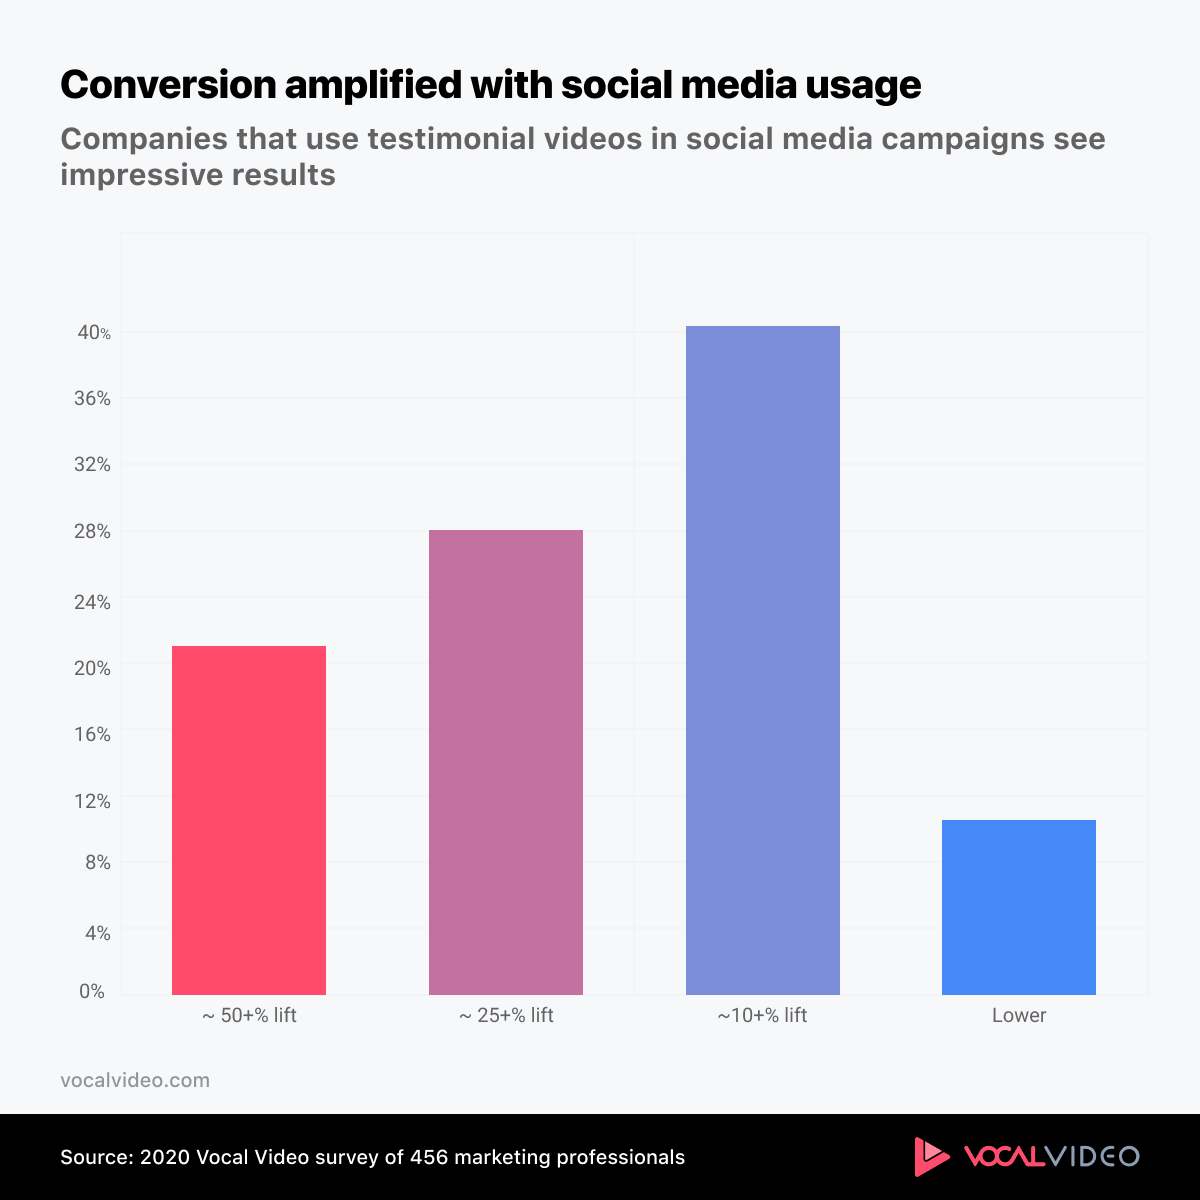 Conversion amplified with social media usage: Companies that use testimonial videos in social media campaigns see impressive results.